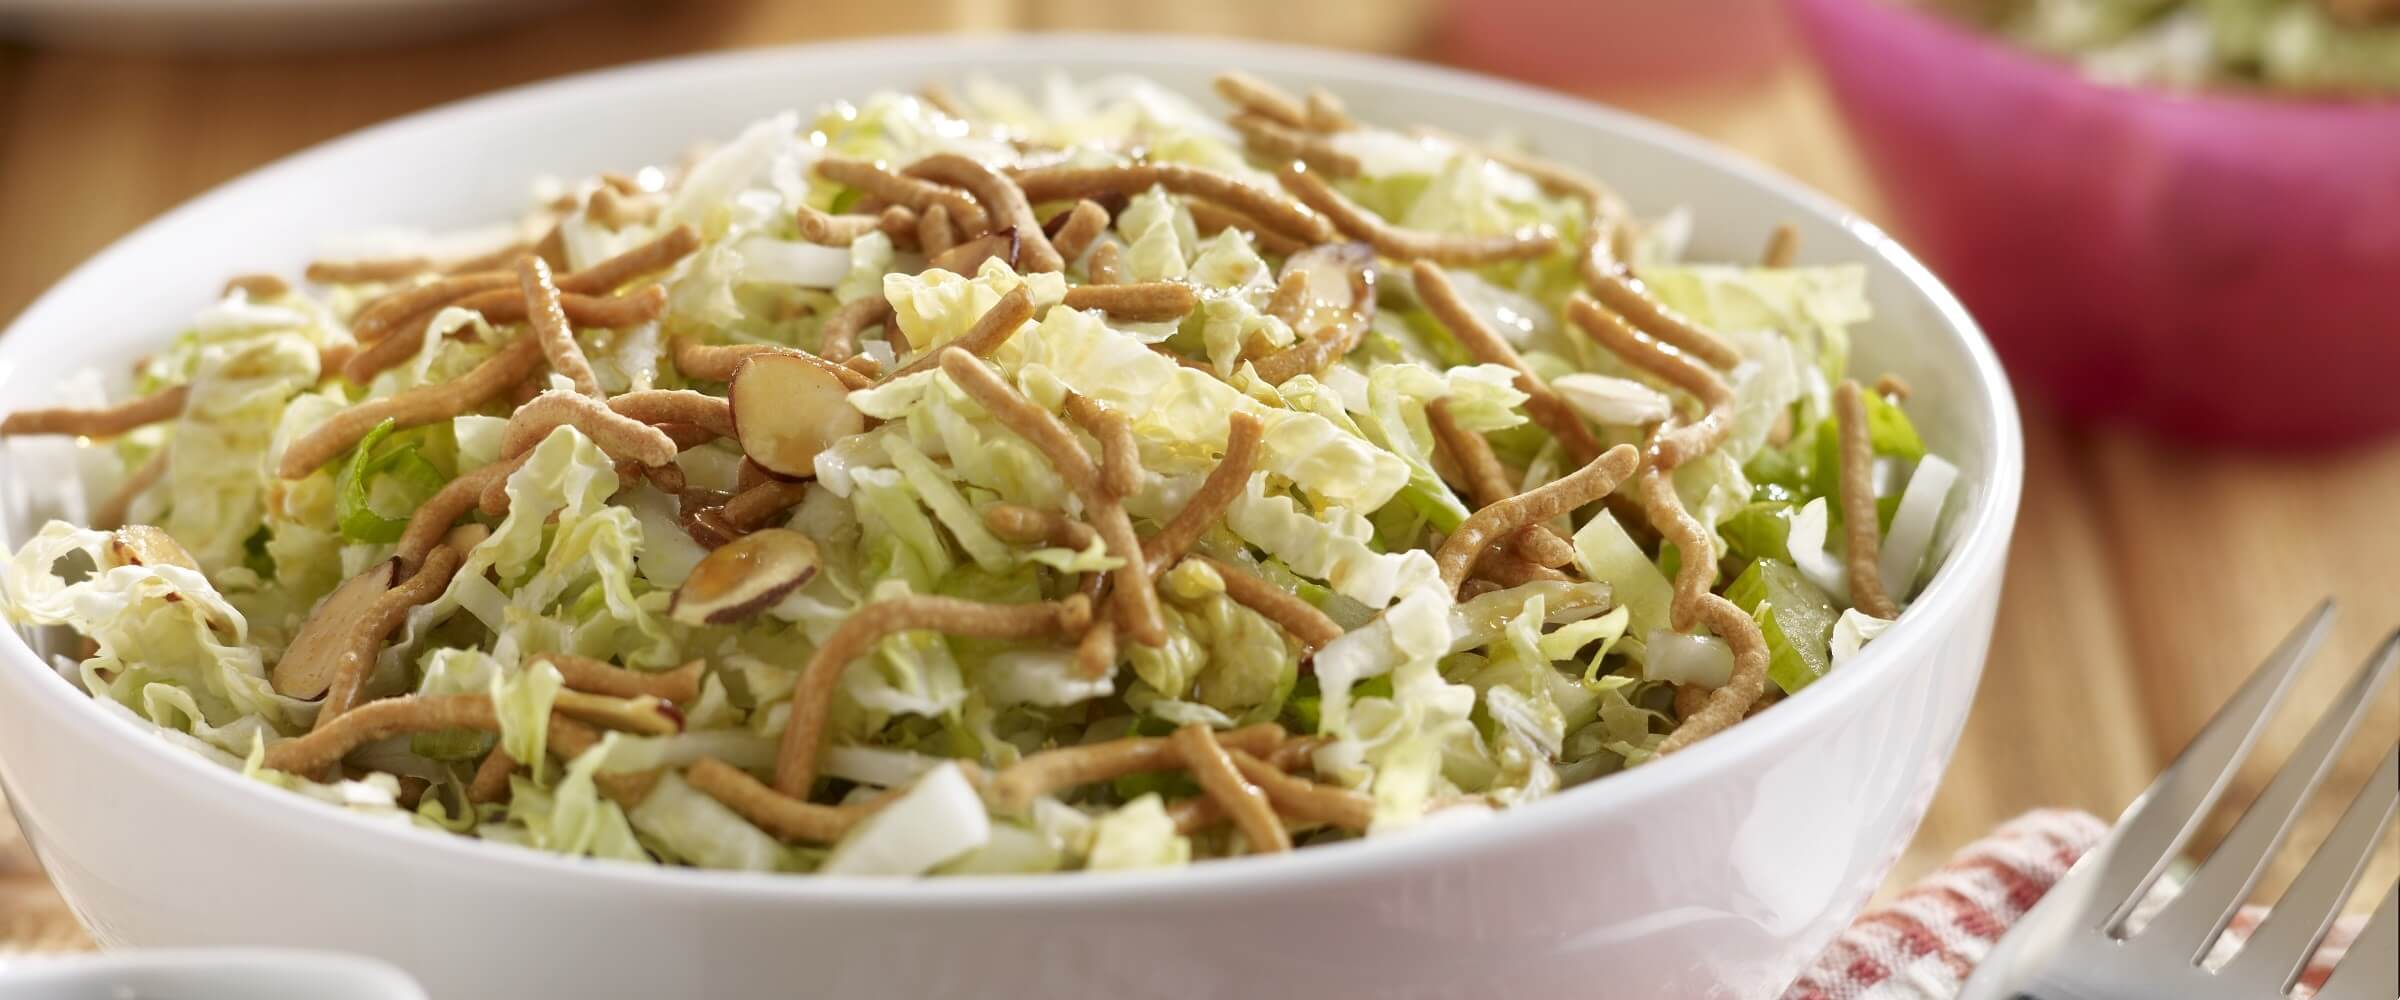 crunchy cabbage salad in white bowl